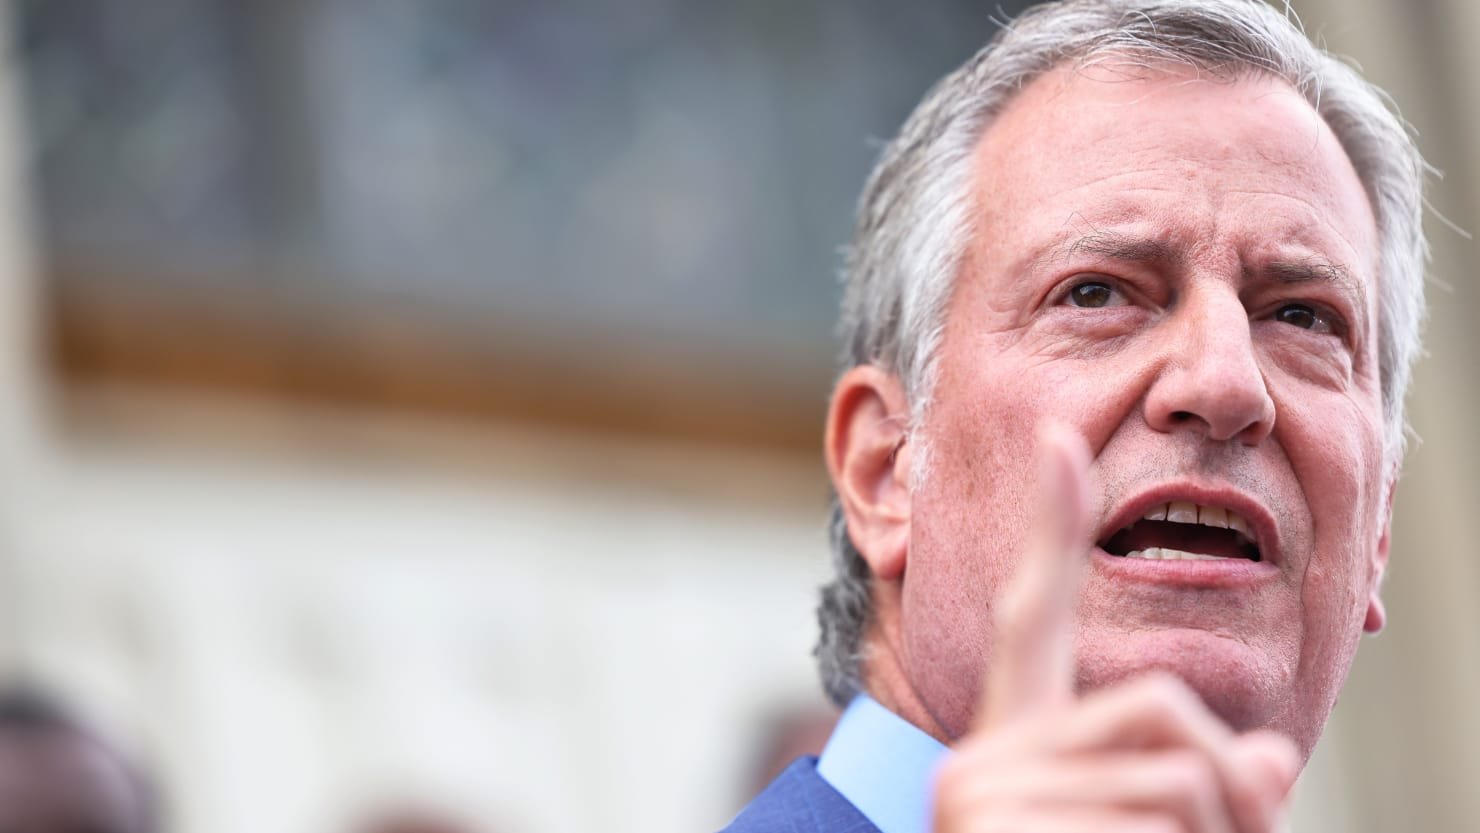 NYC Mayor Used Security Detail for Personal Errands, Investigation Finds